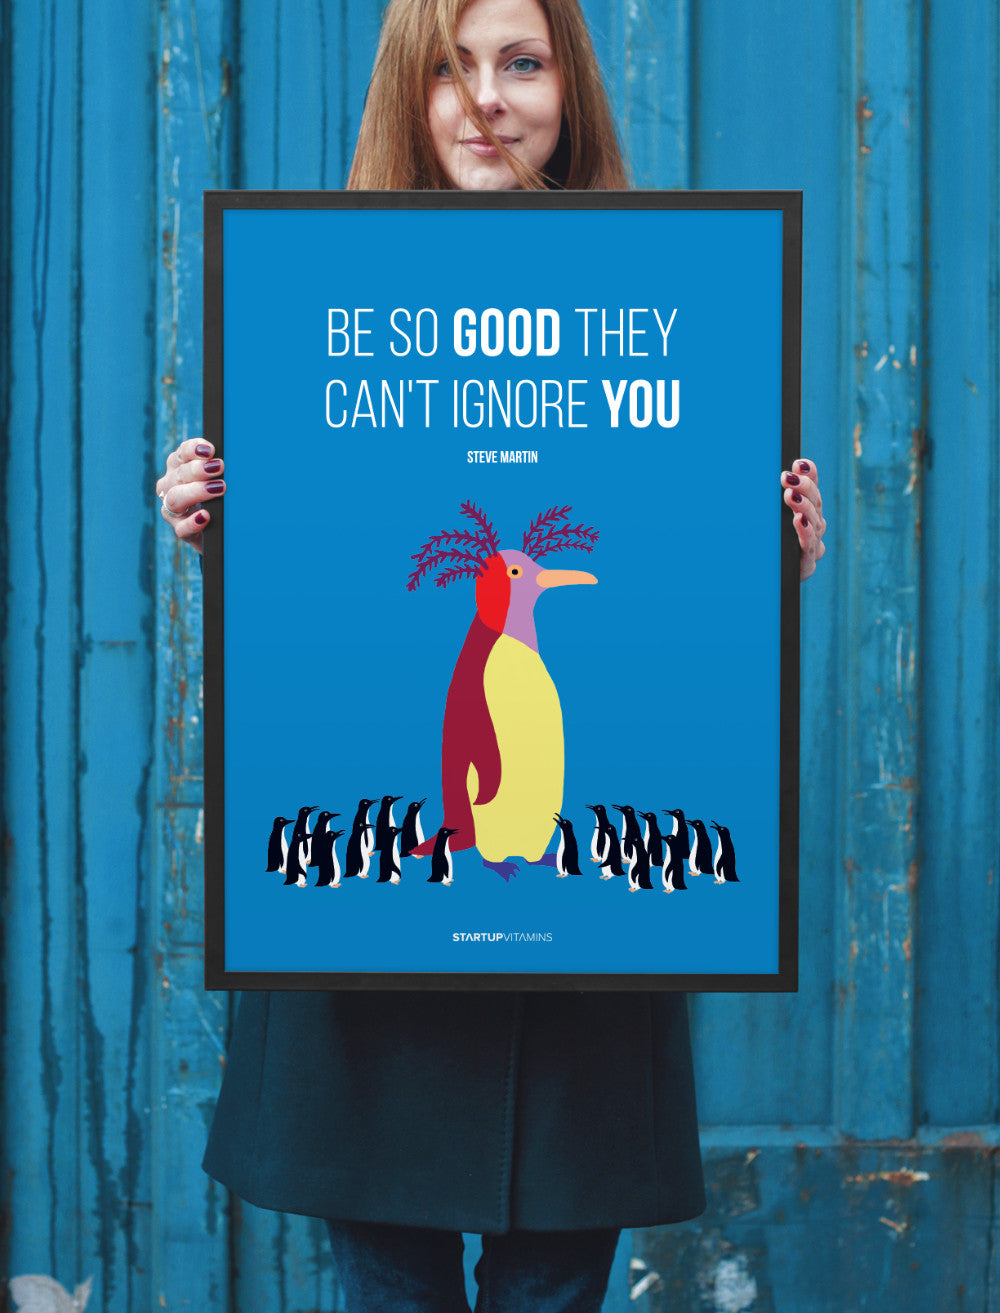 Animal Motivation - If you don't do it, someone else will. Poster